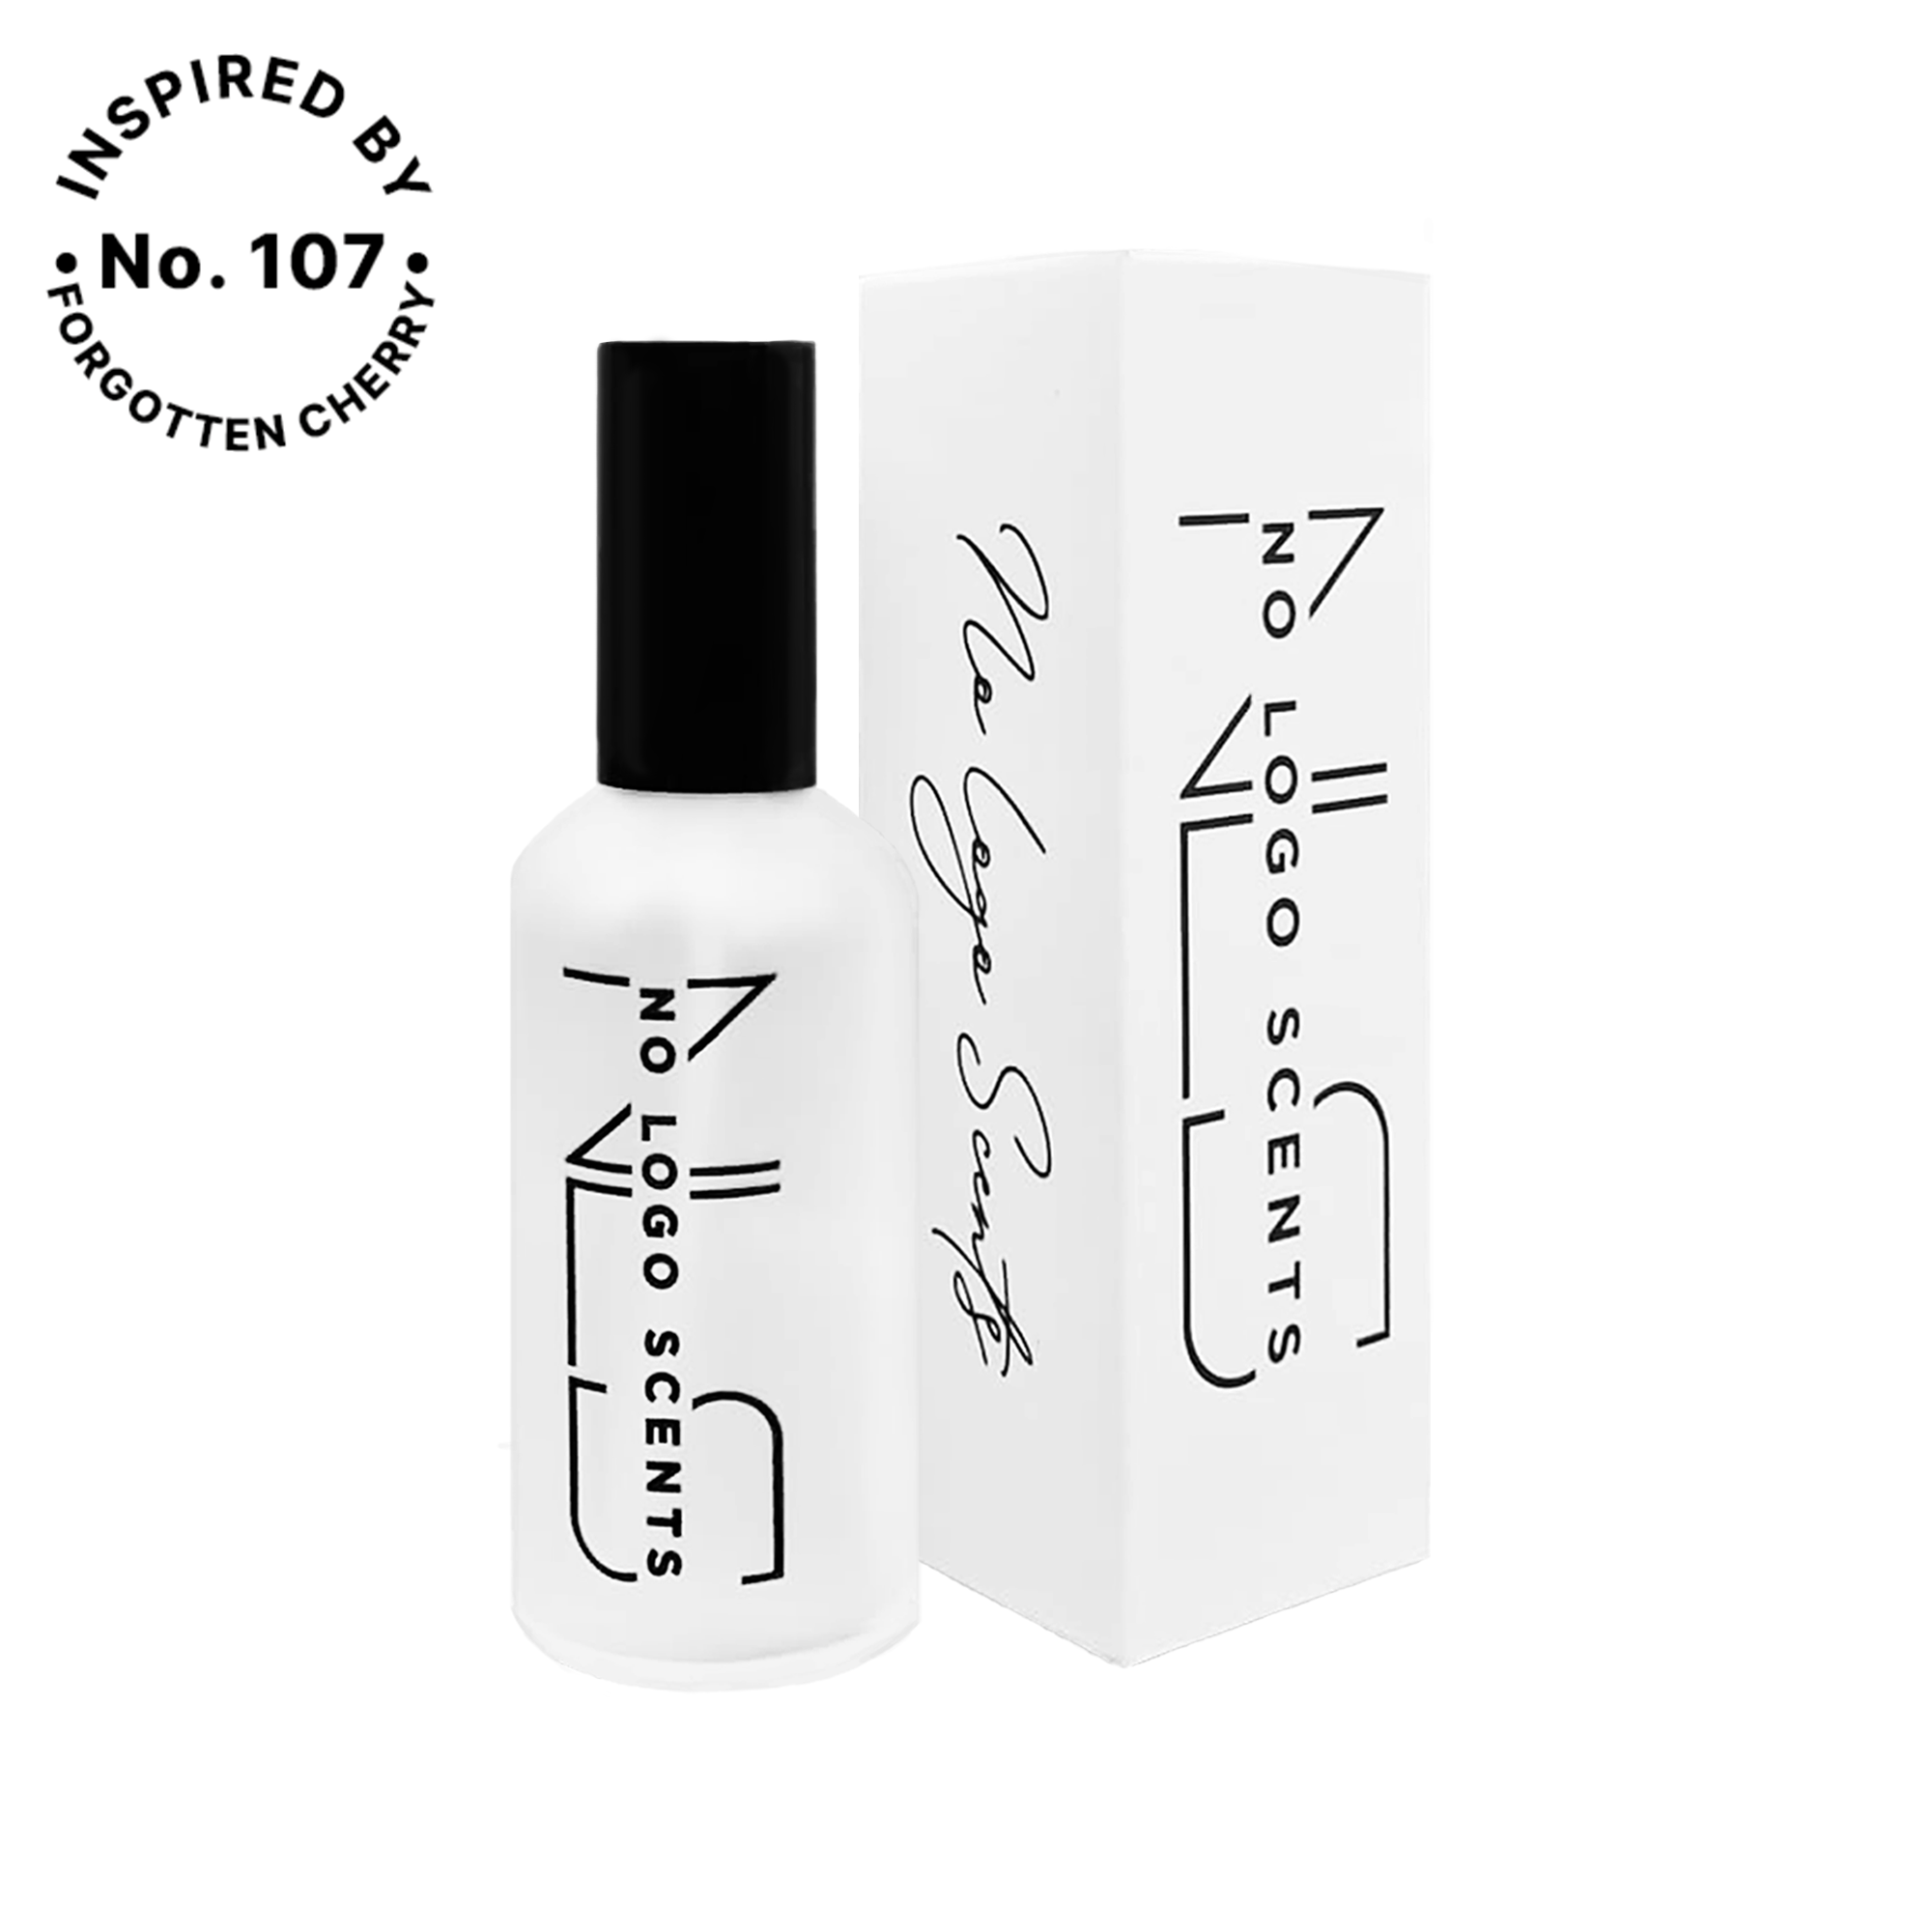 No.107 – INSPIRED BY FORGOTTEN CHERRY from category UNISEX PERFUMES - 1